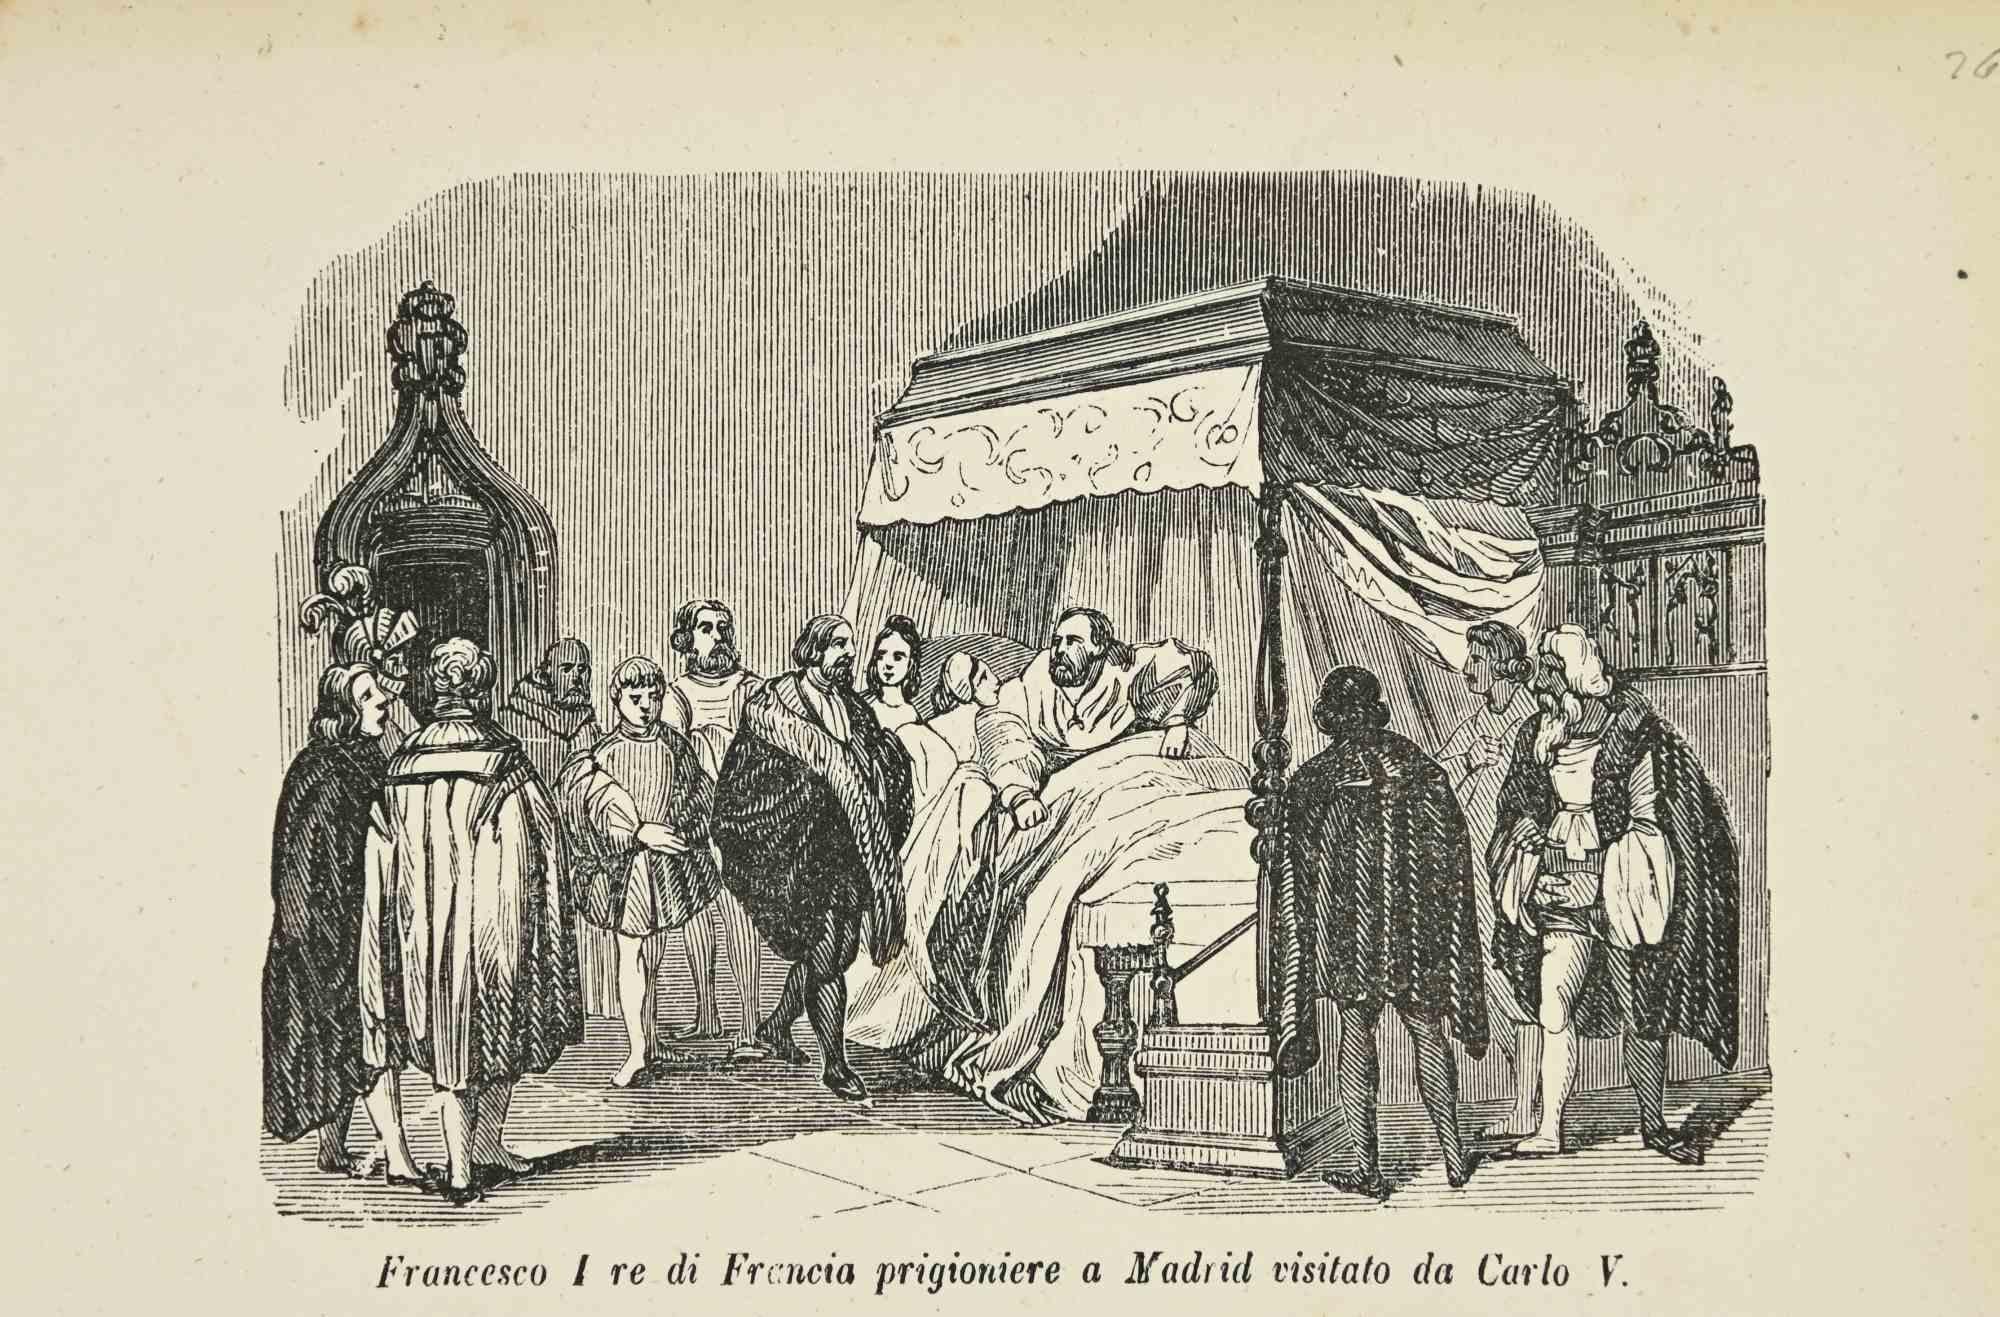 Unknown Figurative Print - Francis I King of France Prisoned in Madrid - Lithograph - 1862